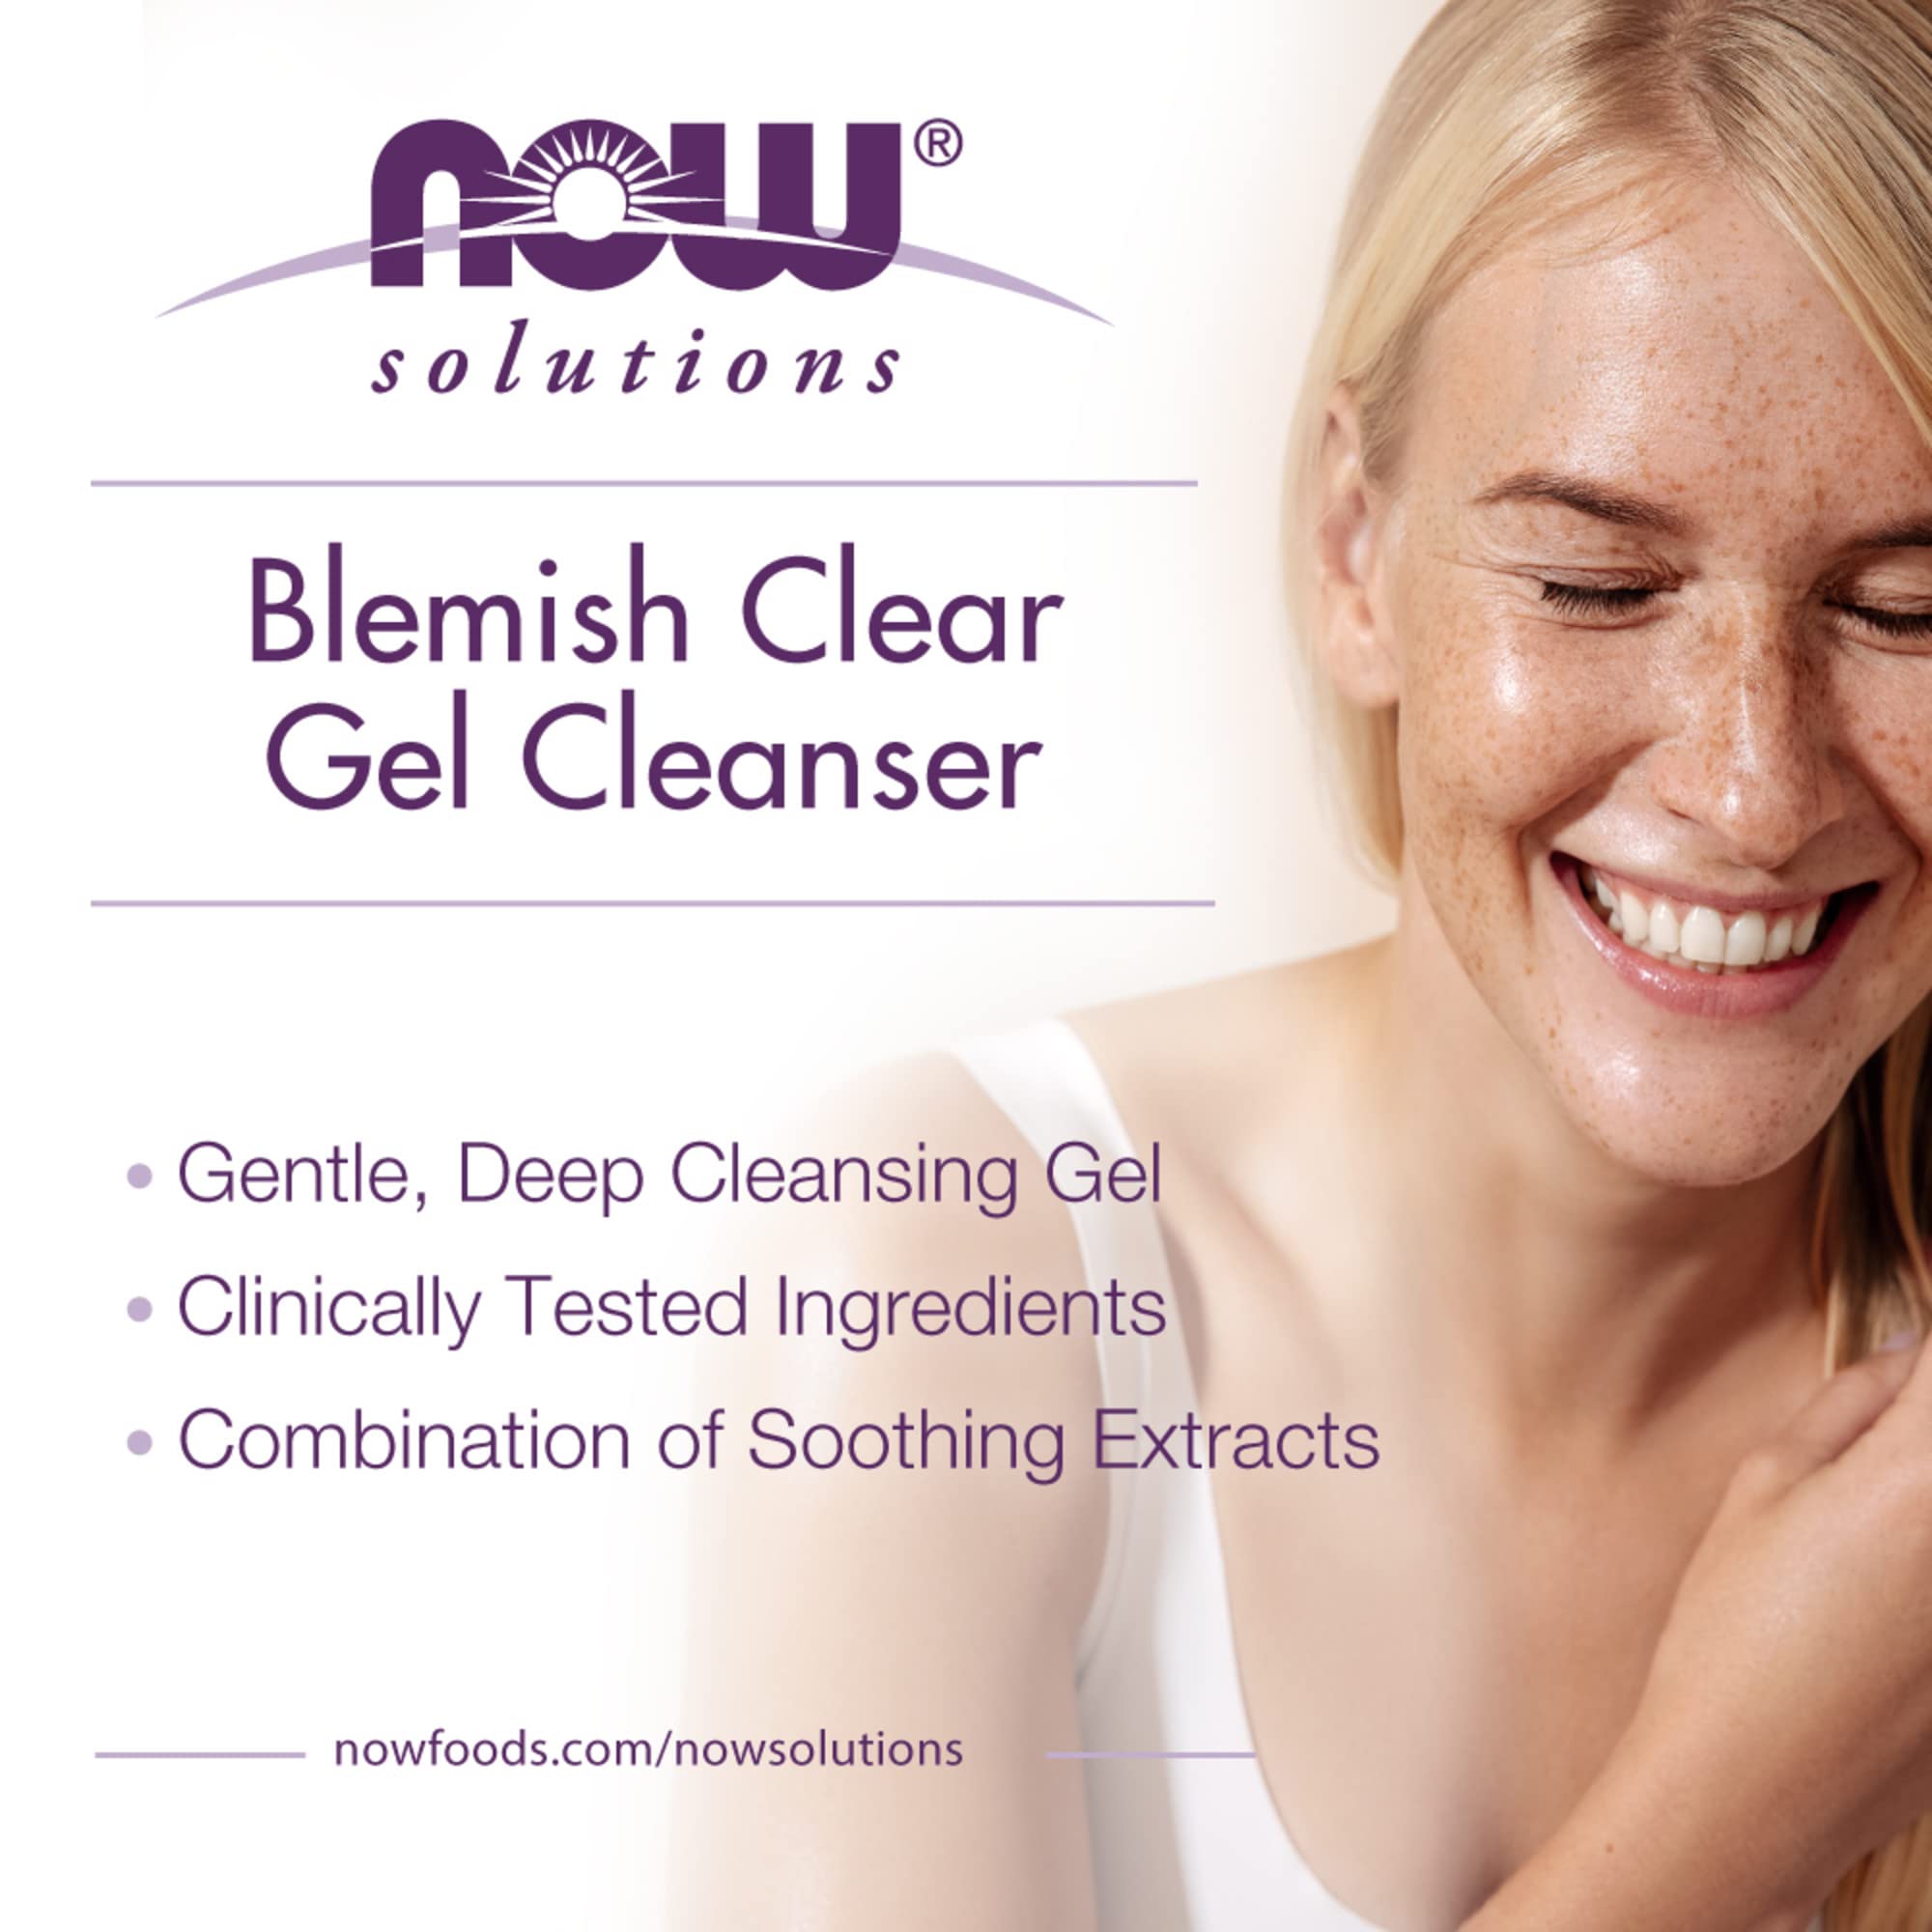 NOW Solutions, Blemish Clear Gel Cleanser, Gentle Deep Cleansing, Cleans Pores, Purify, 4-Ounce